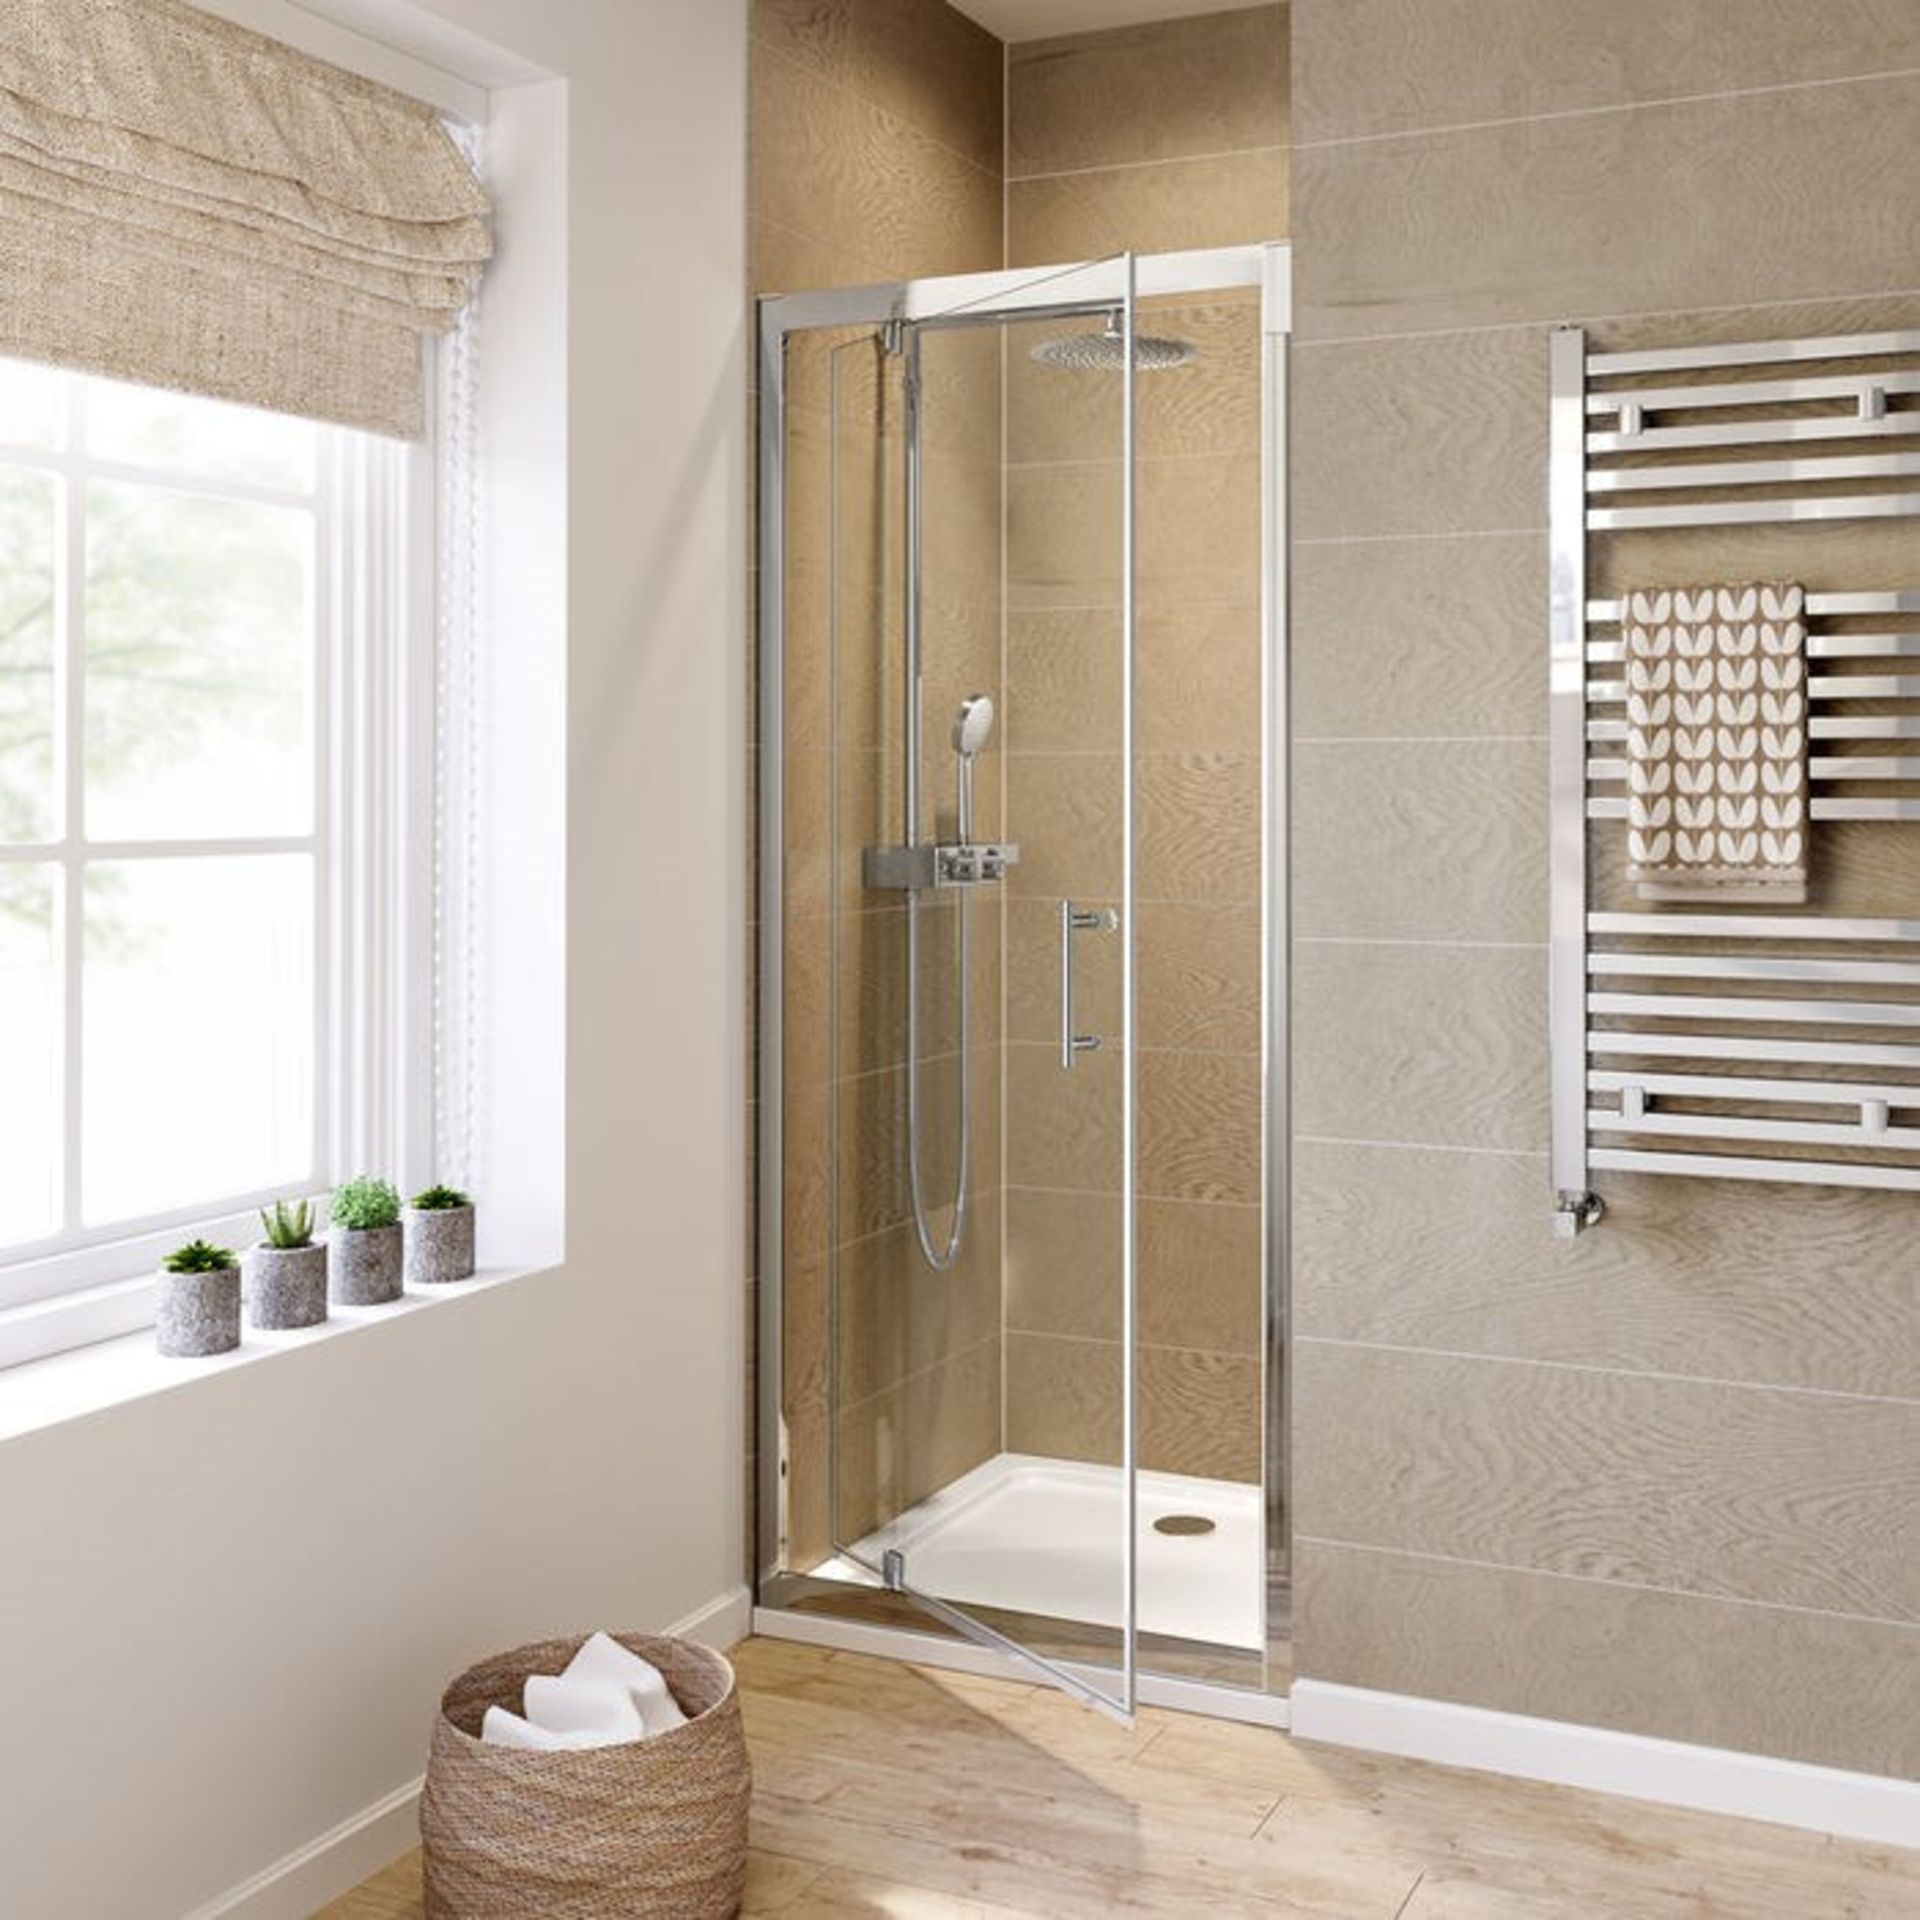 Brand New Twyfords 700mm - 6mm - Premium Pivot Shower Door. RRP £299.99.8mm Safety Glass Fully water - Image 2 of 3